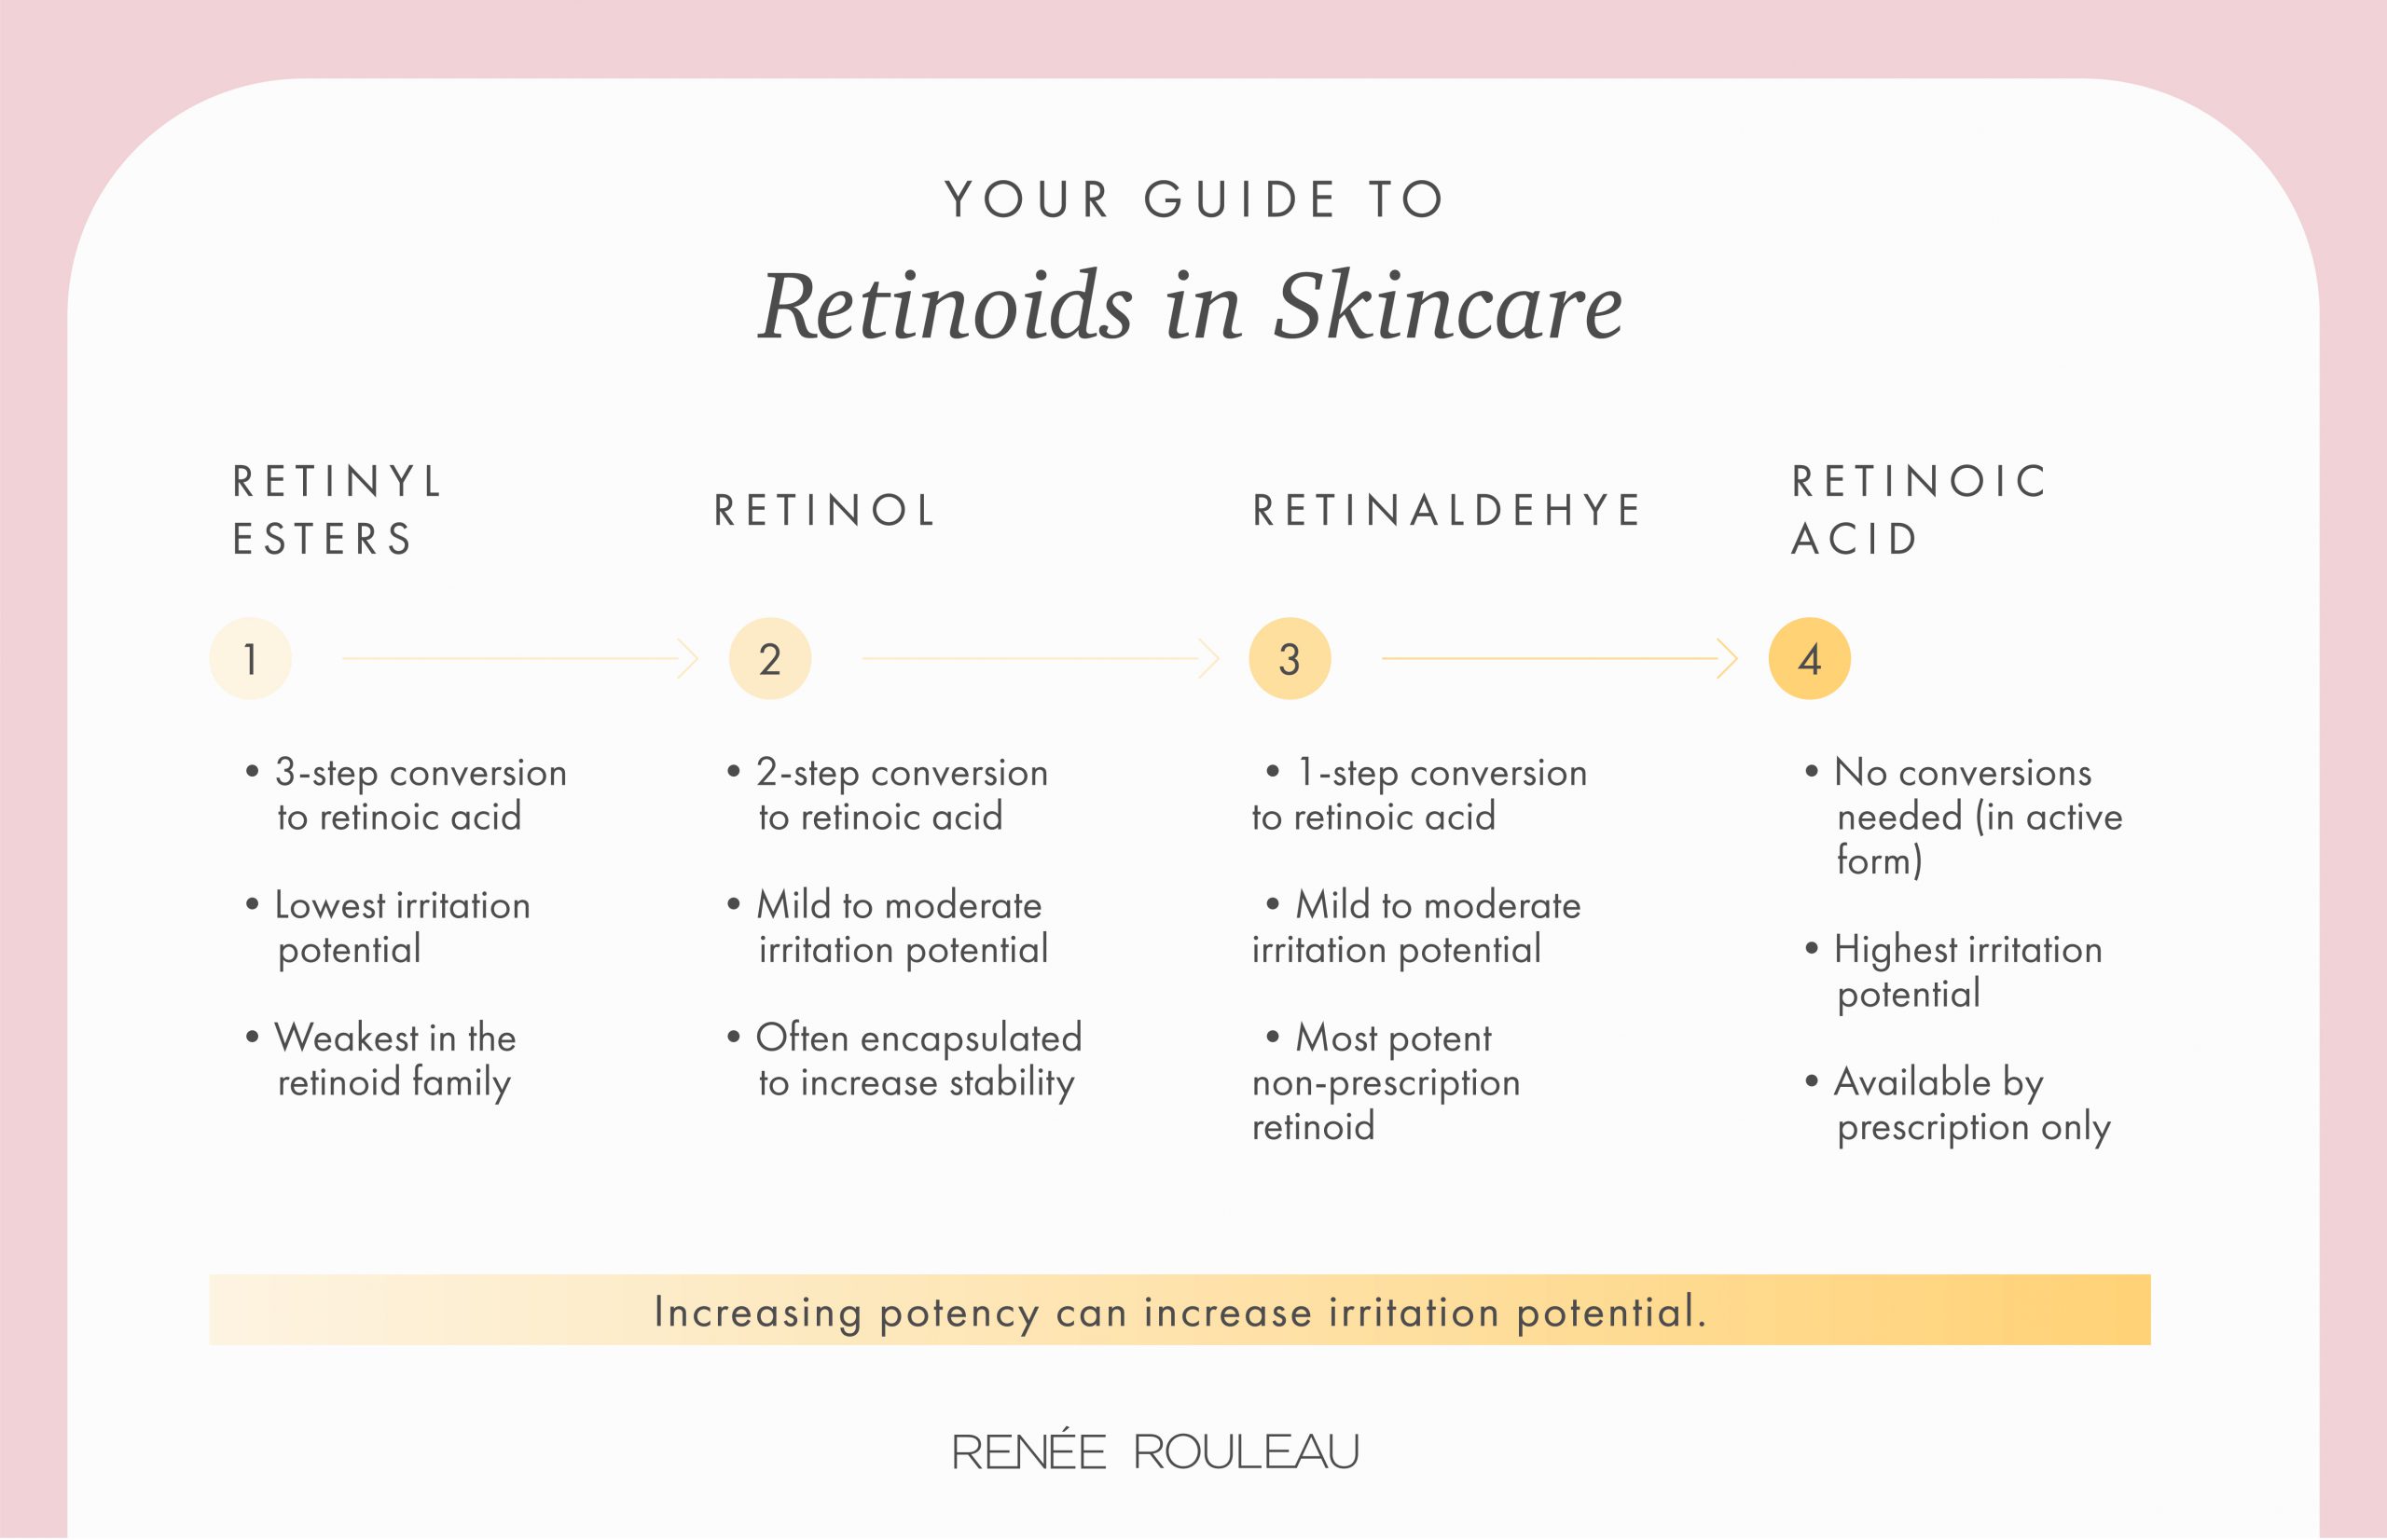 Types of Retinoids: What's the Difference and How Do They Affect the Skin?